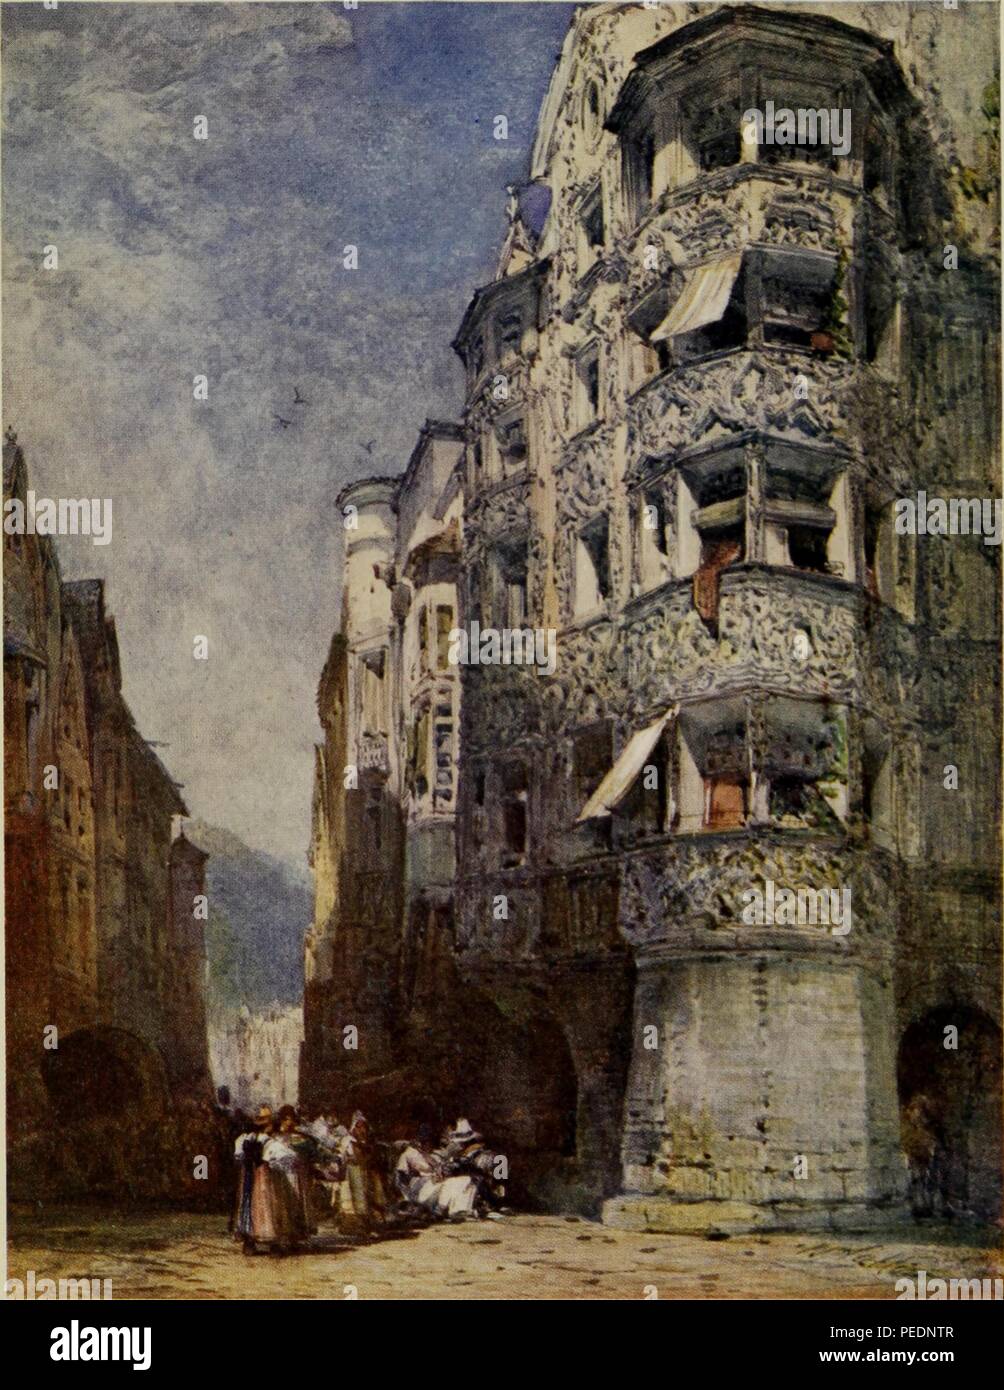 Color print depicting a city street in Innsbruck, Austria, with a heavily carved baroque, stone facade on the turreted building in the foreground, and several people gathered in the street, 1908. Courtesy Internet Archive. () Stock Photo